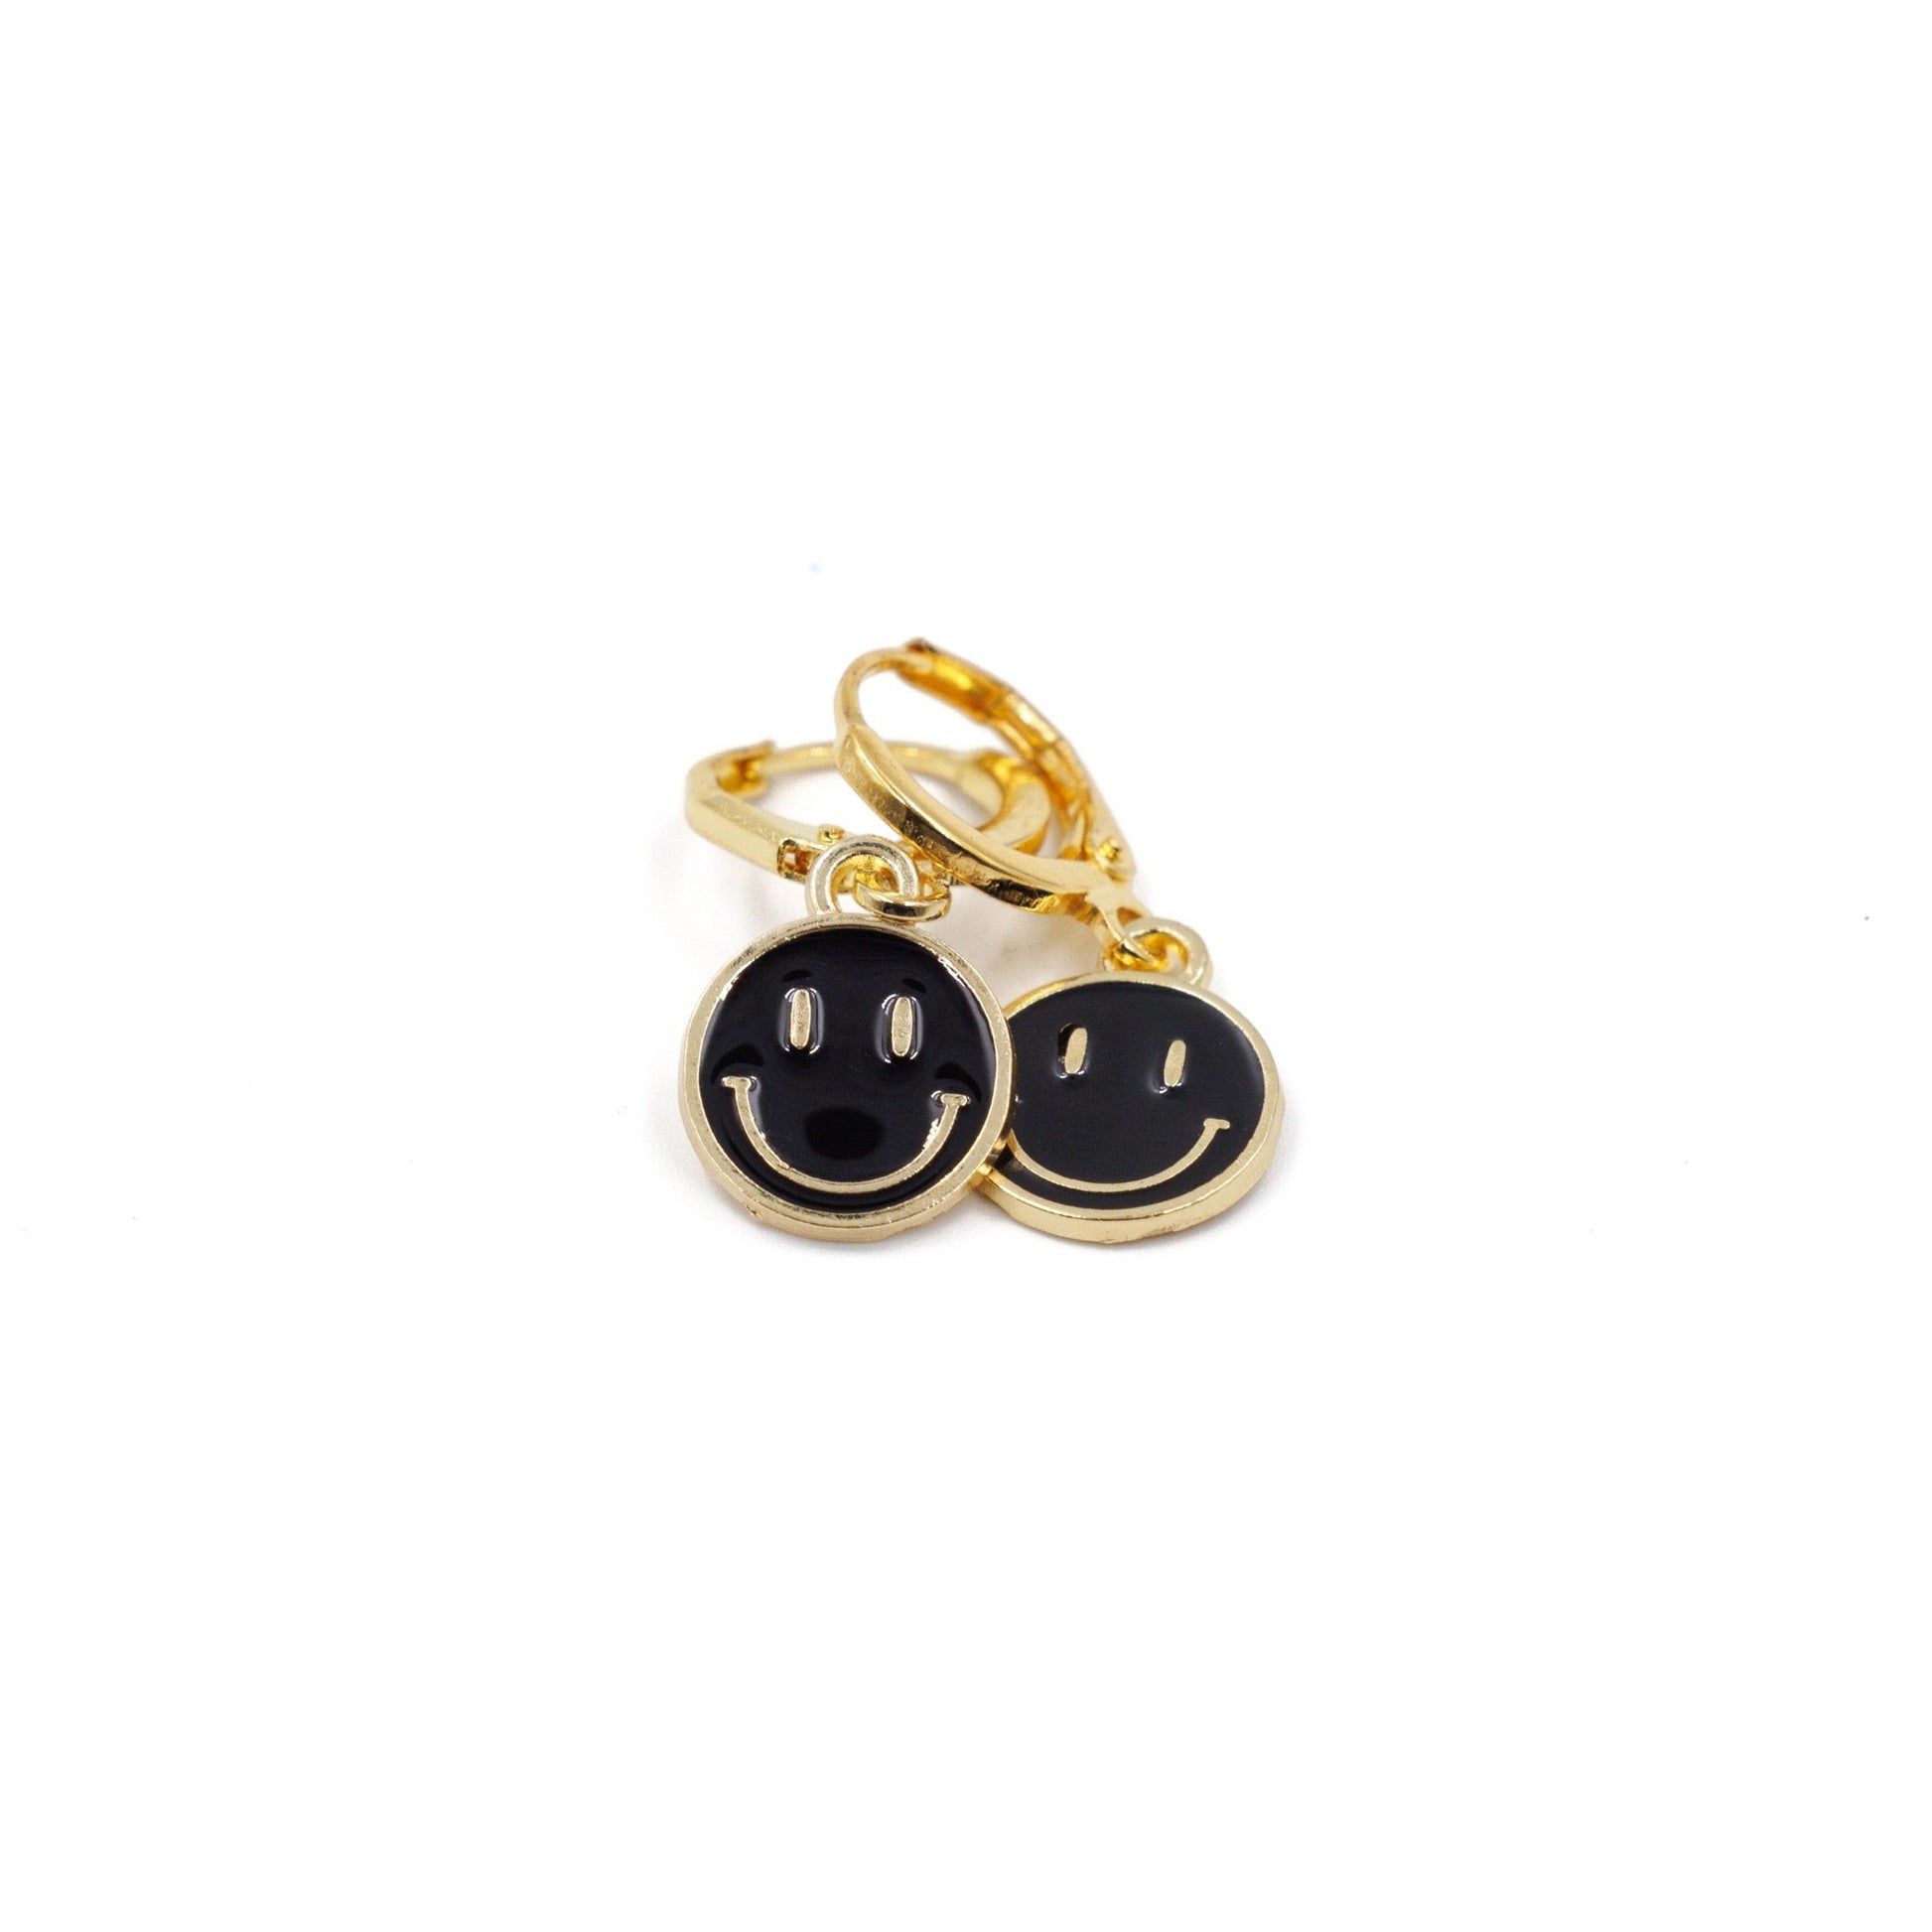 Retro '80s-'90s Dual Happy Face Charm Earrings | 4 Color Options | Yellow, Black, White, Pink